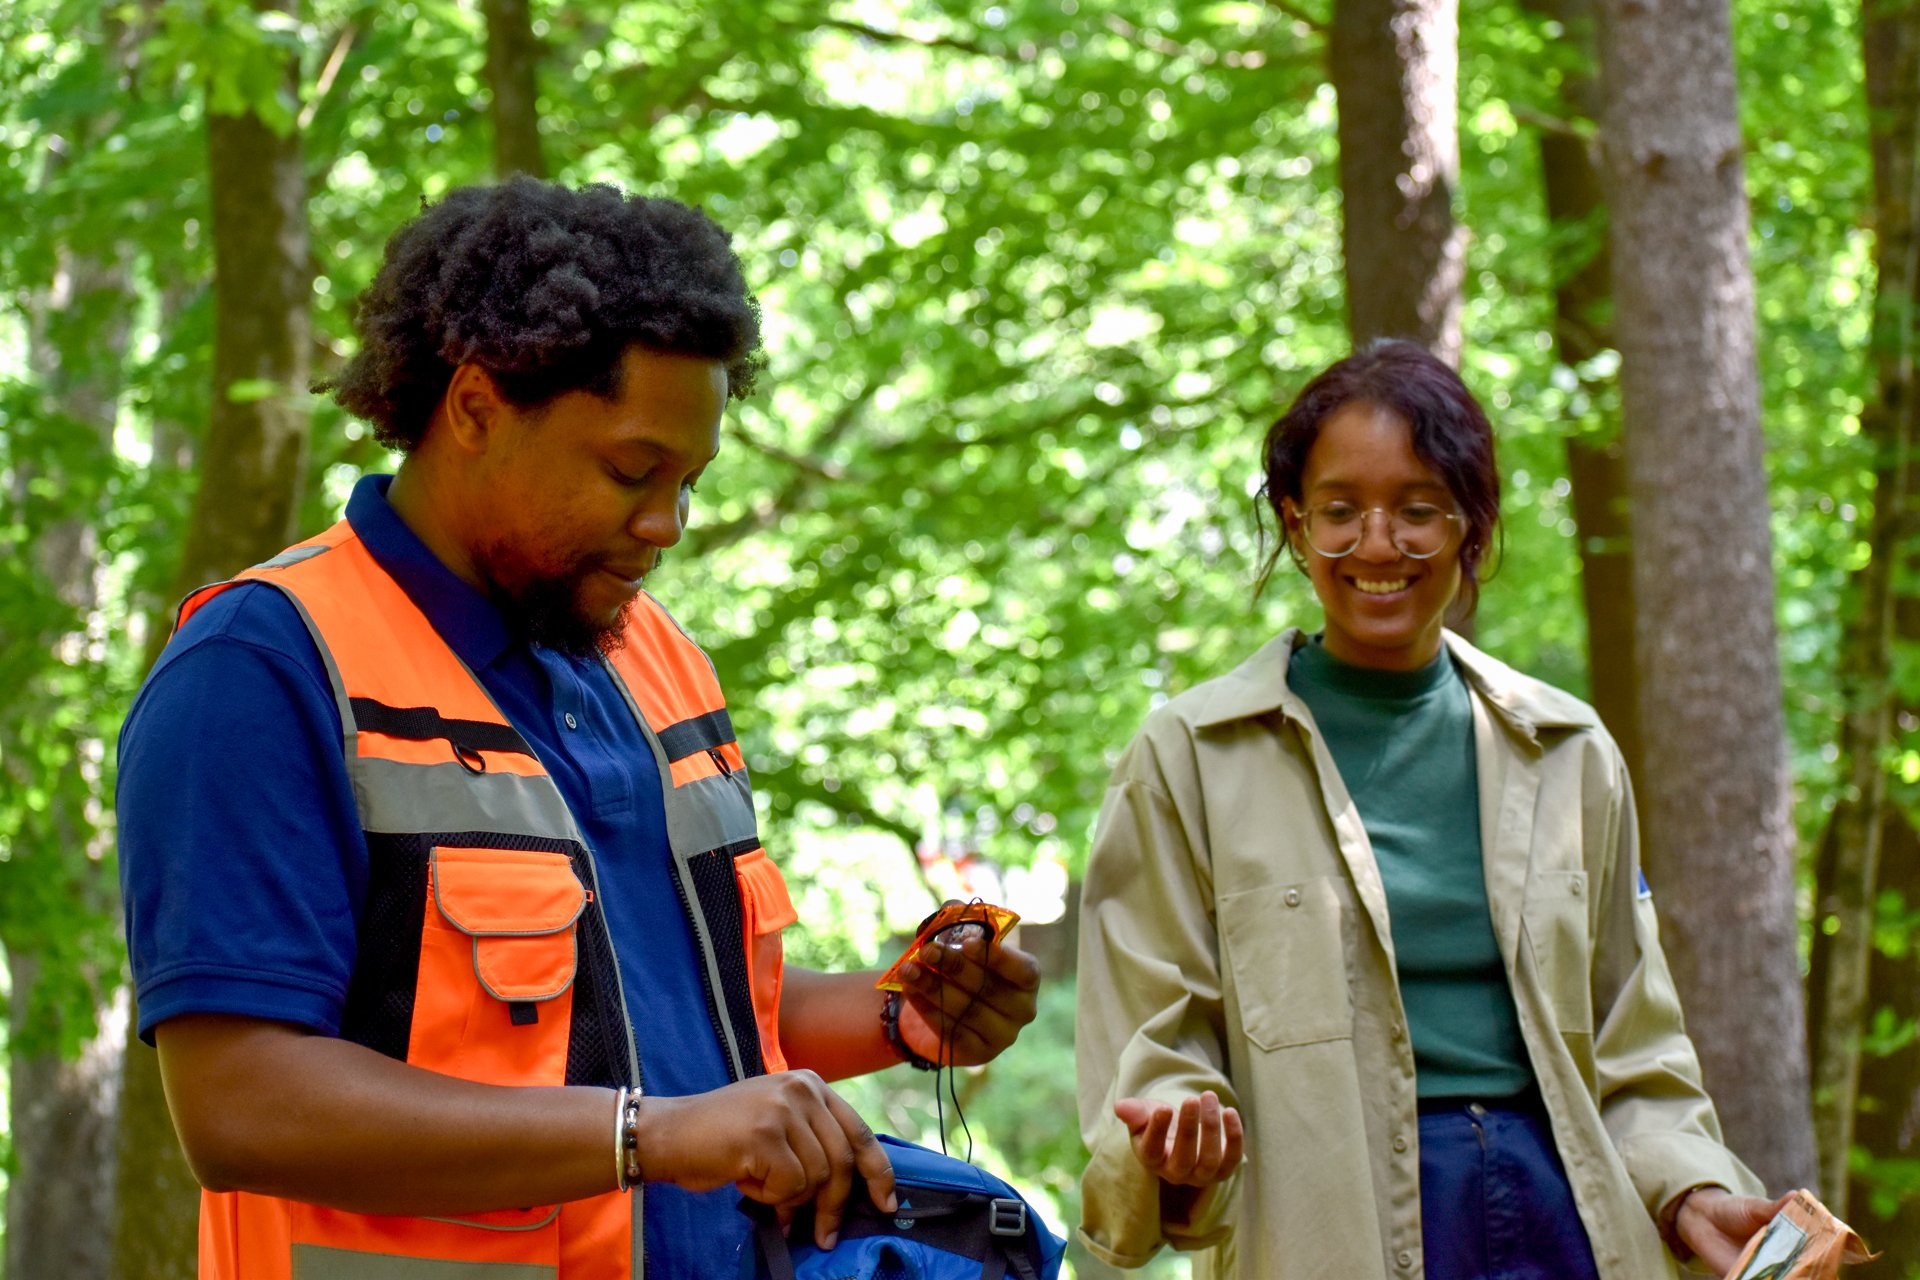 Two Fellows from the Environmental Fellowship Program in a lush, green forest, wearing field dress and holding a compass for navigation